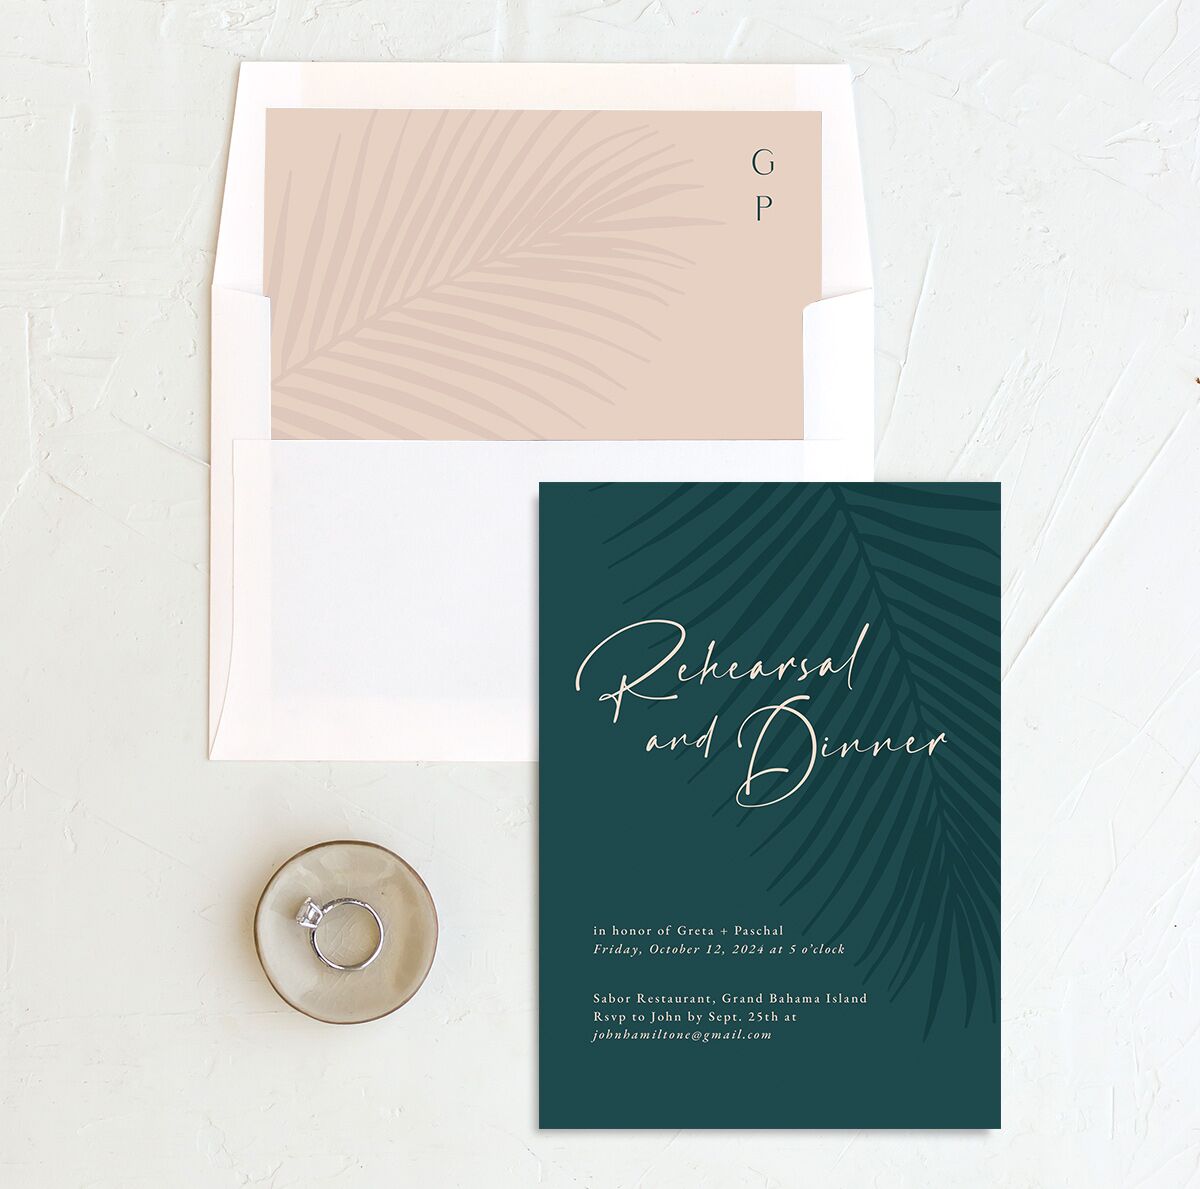 Lavish Palm Rehearsal Dinner Invitations envelope-and-liner in teal